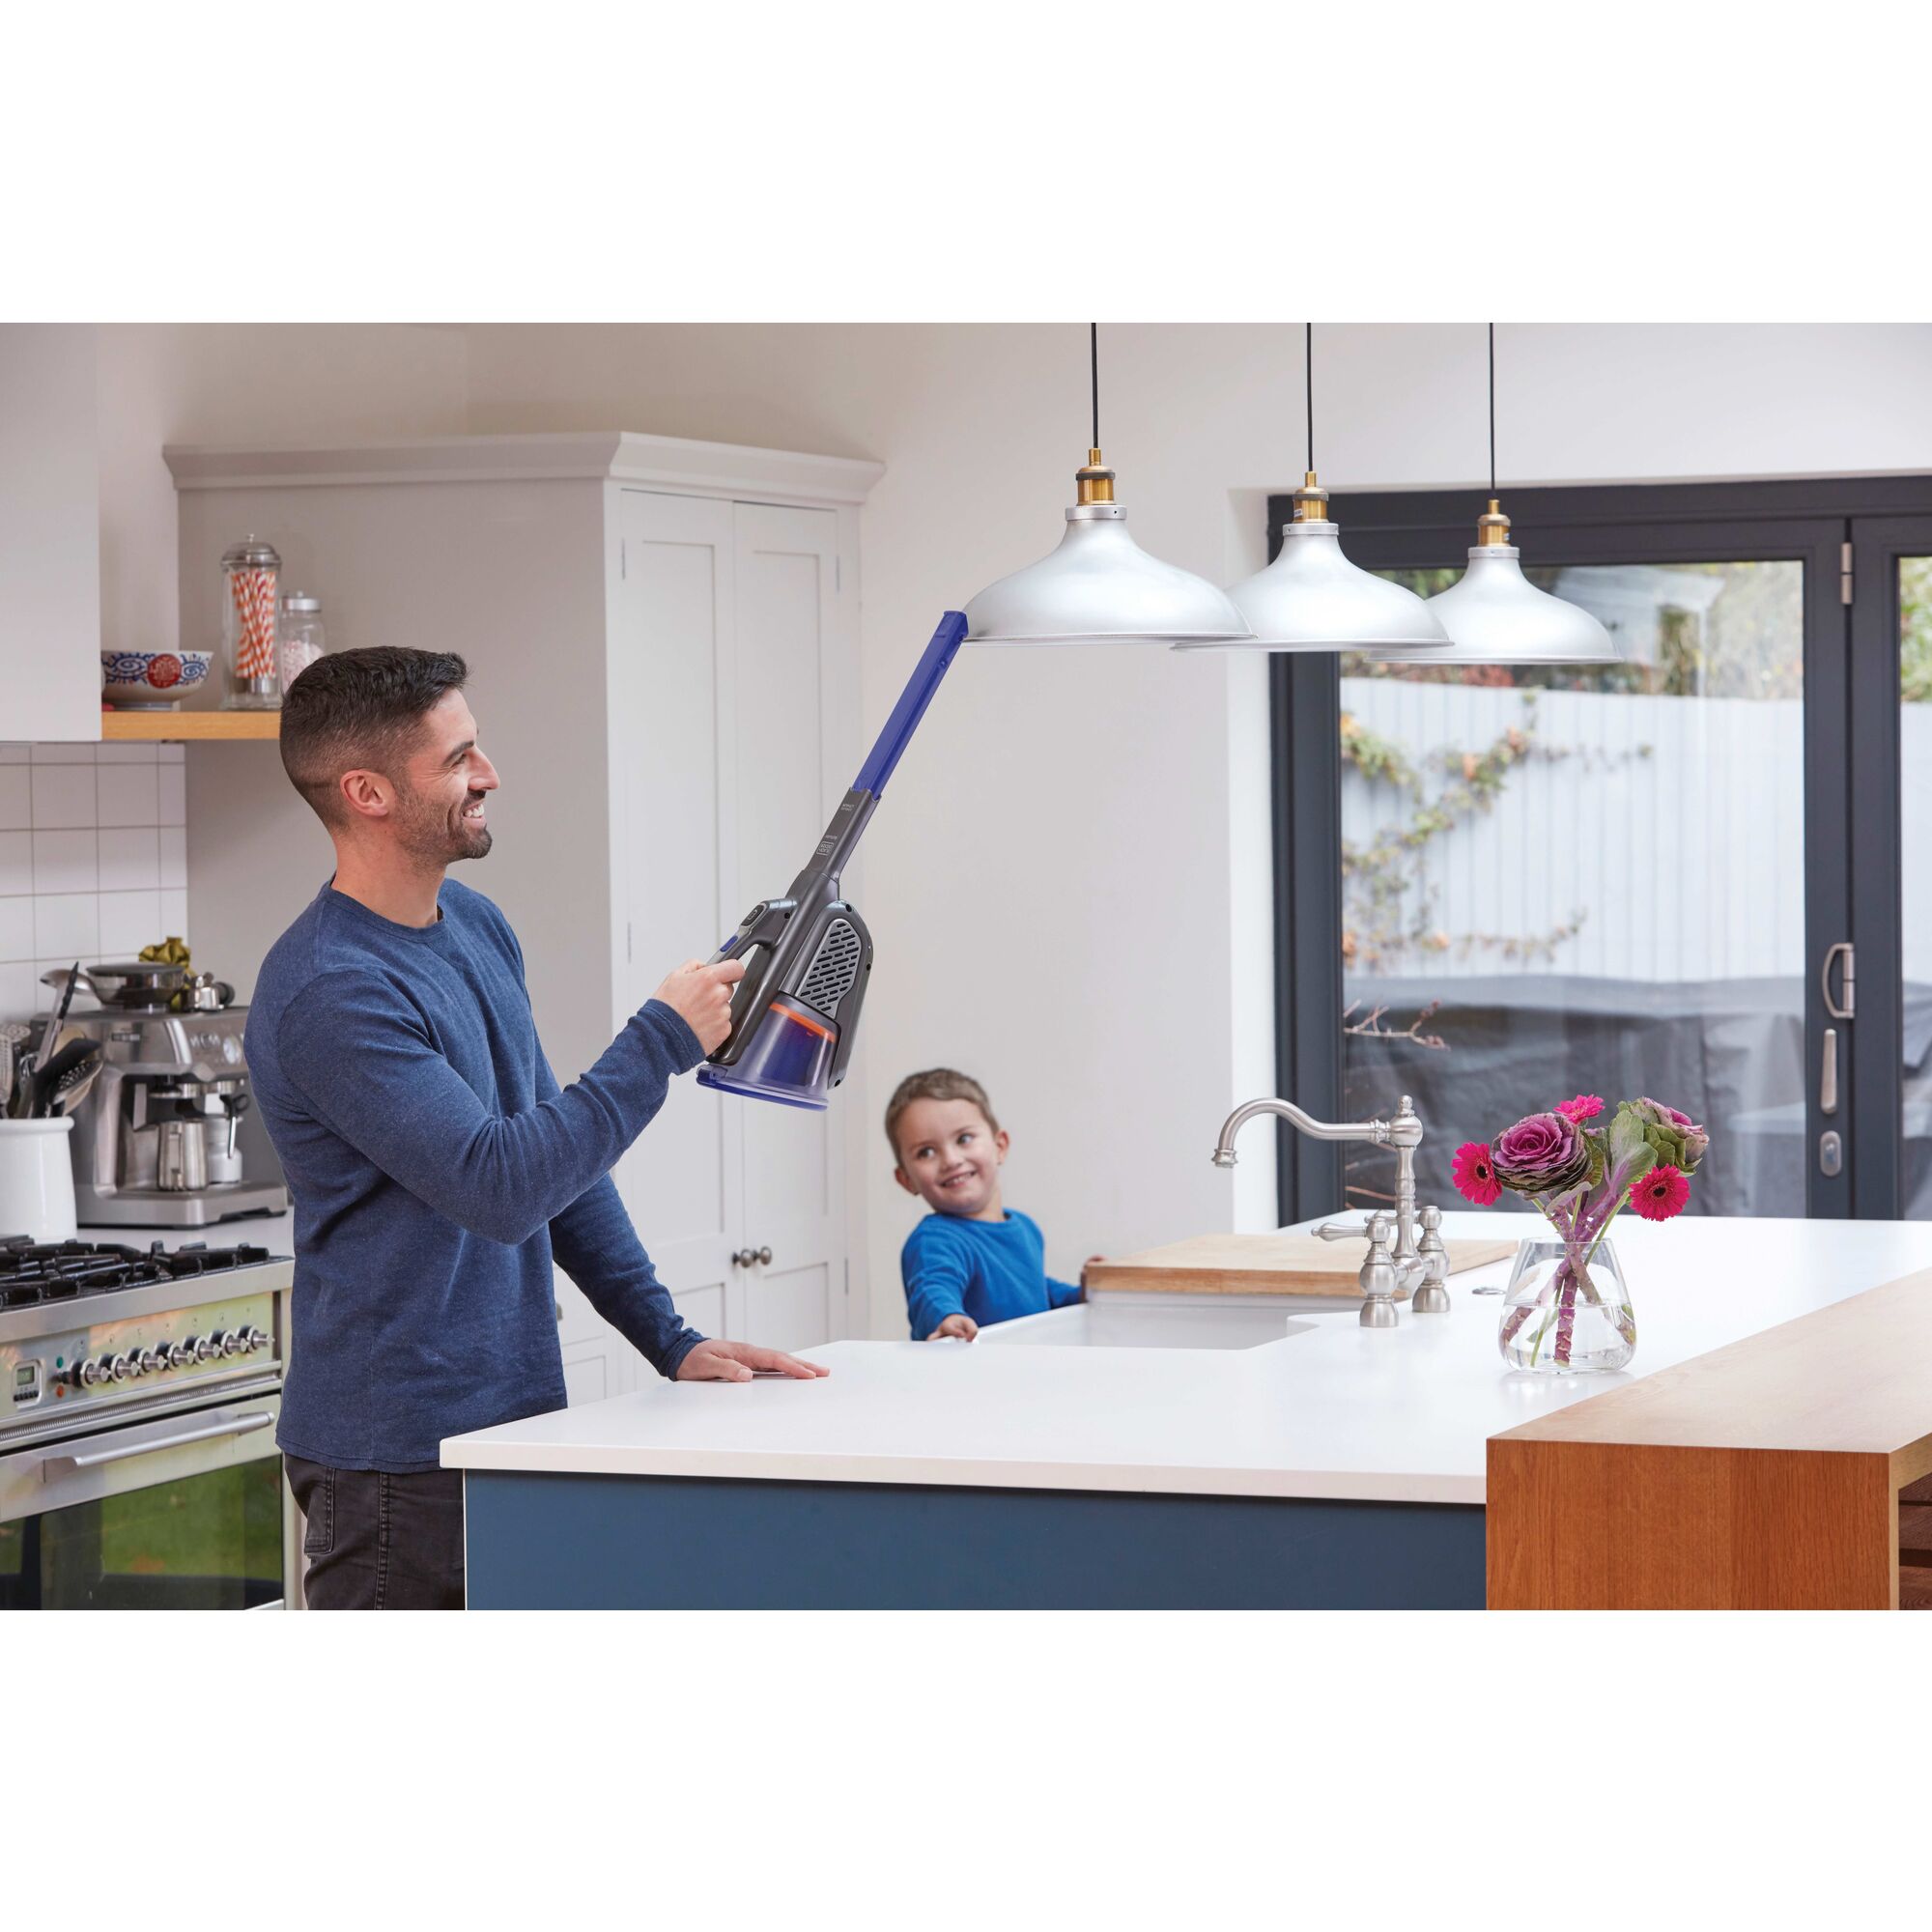 20 Volt dust buster Advanced Clean plus Pet Hand Vacuum With Base Charger and Extra Filter being used by person on hanging lights.